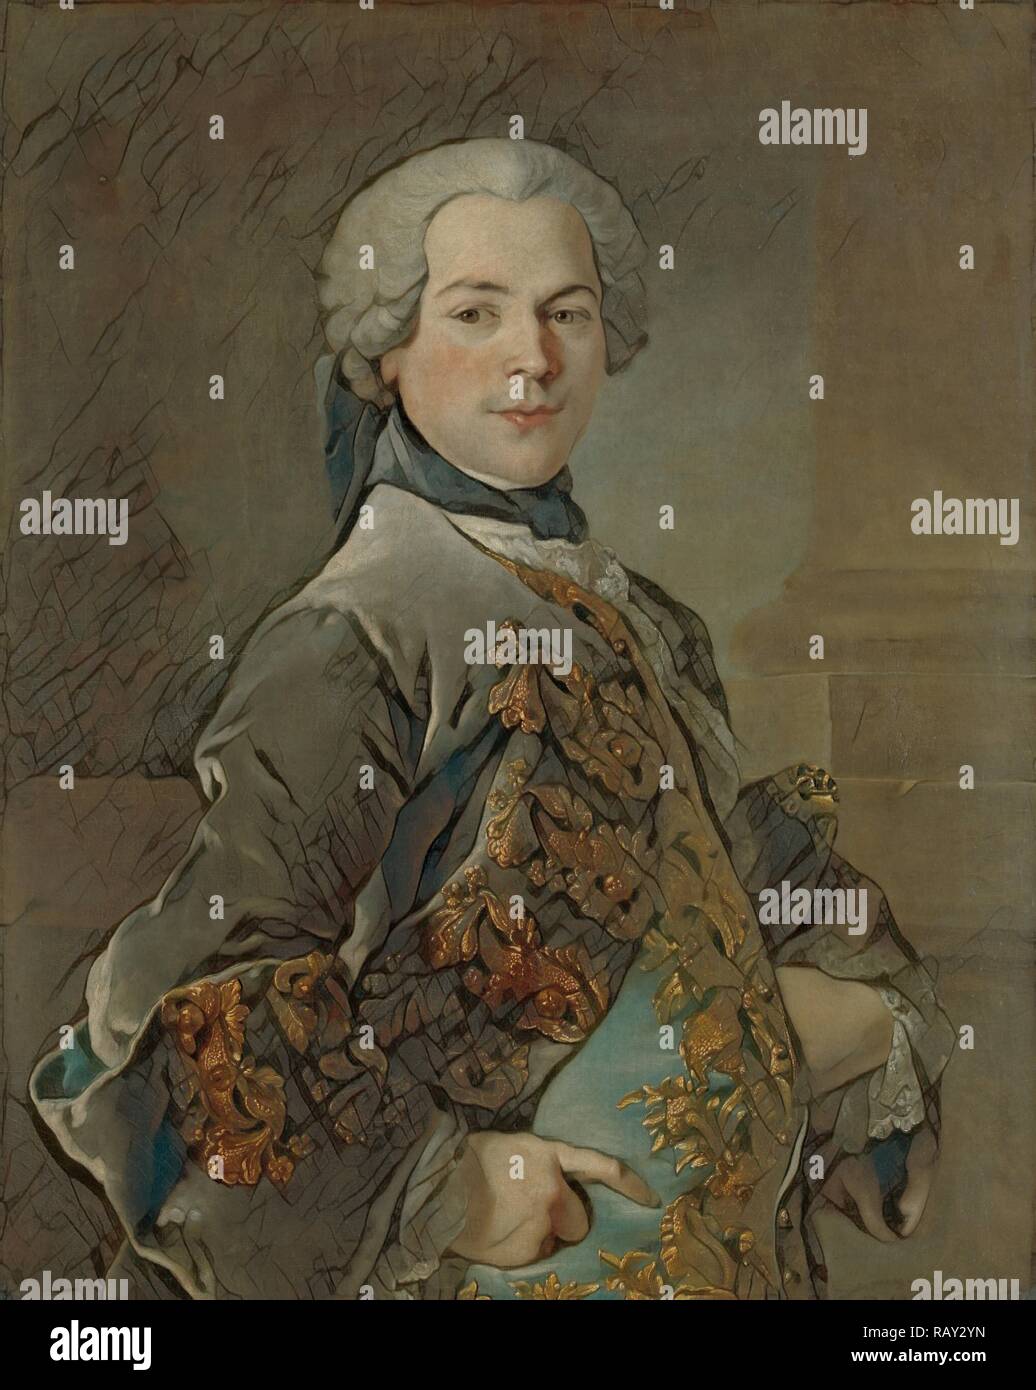 Portrait of Isaac van Rijneveld, Louis Tocqué, 1738. Reimagined by Gibon. Classic art with a modern twist reimagined Stock Photo